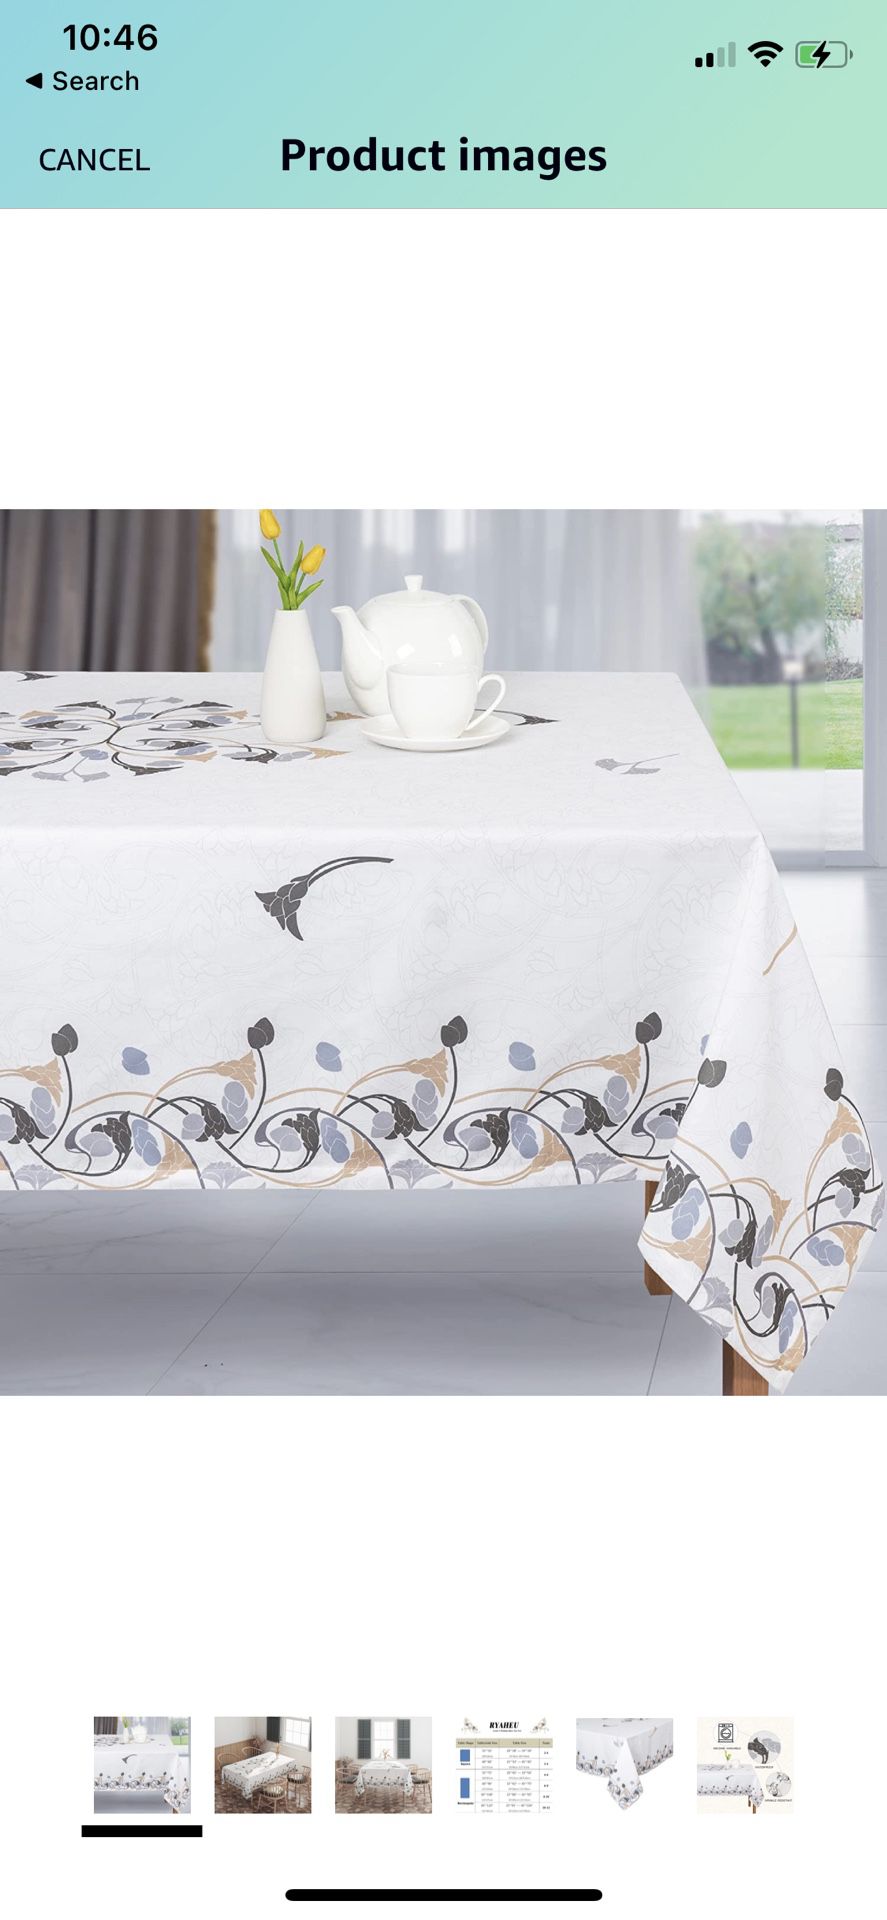 Waterproof and washable table cloth